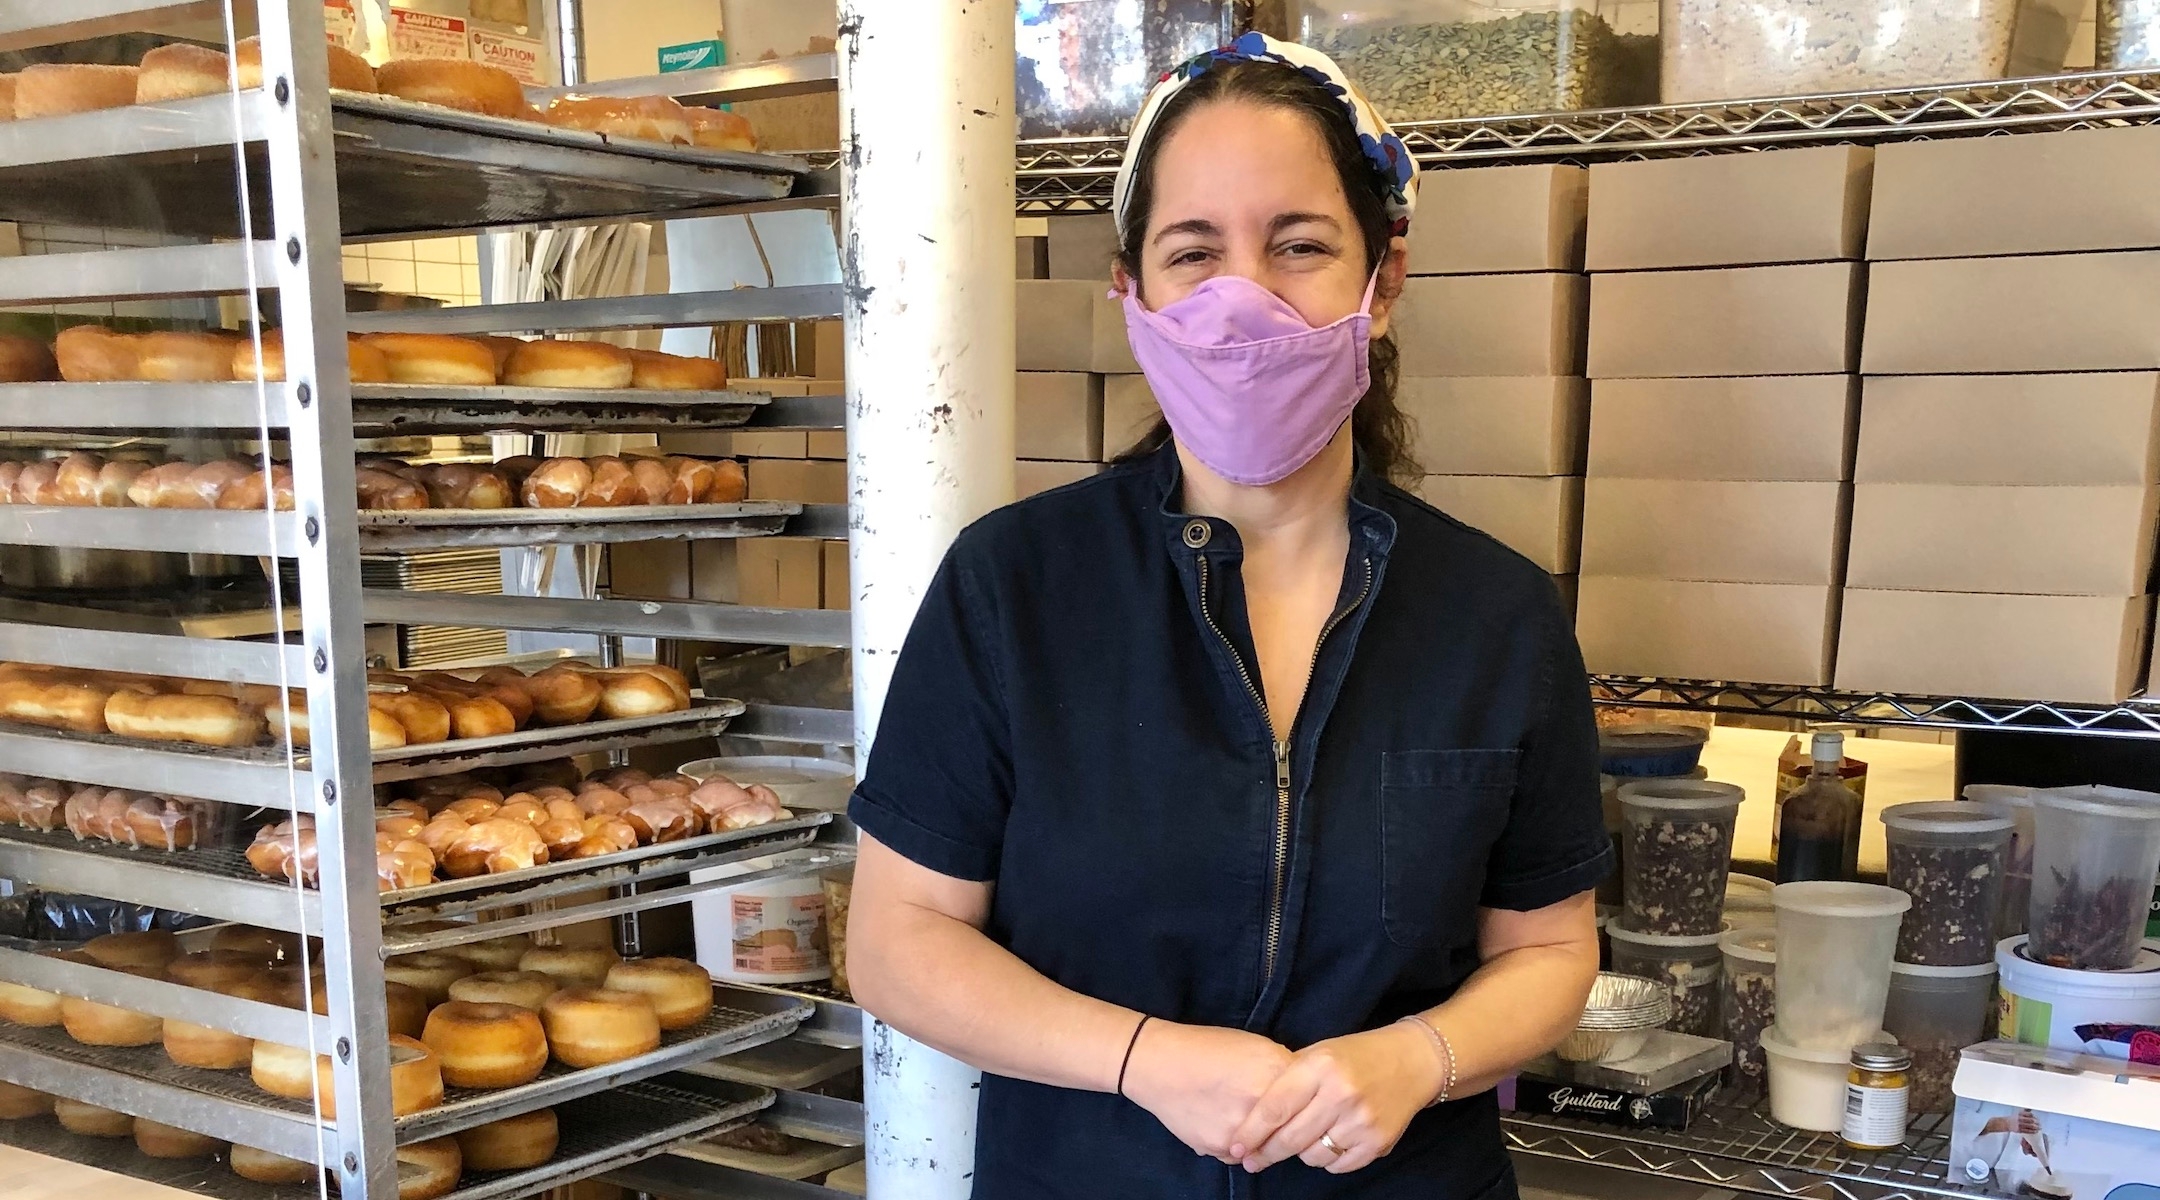 Brooklyn’s Mexican-Jewish chef Fany Gerson tends to make doughnuts that are out of this world